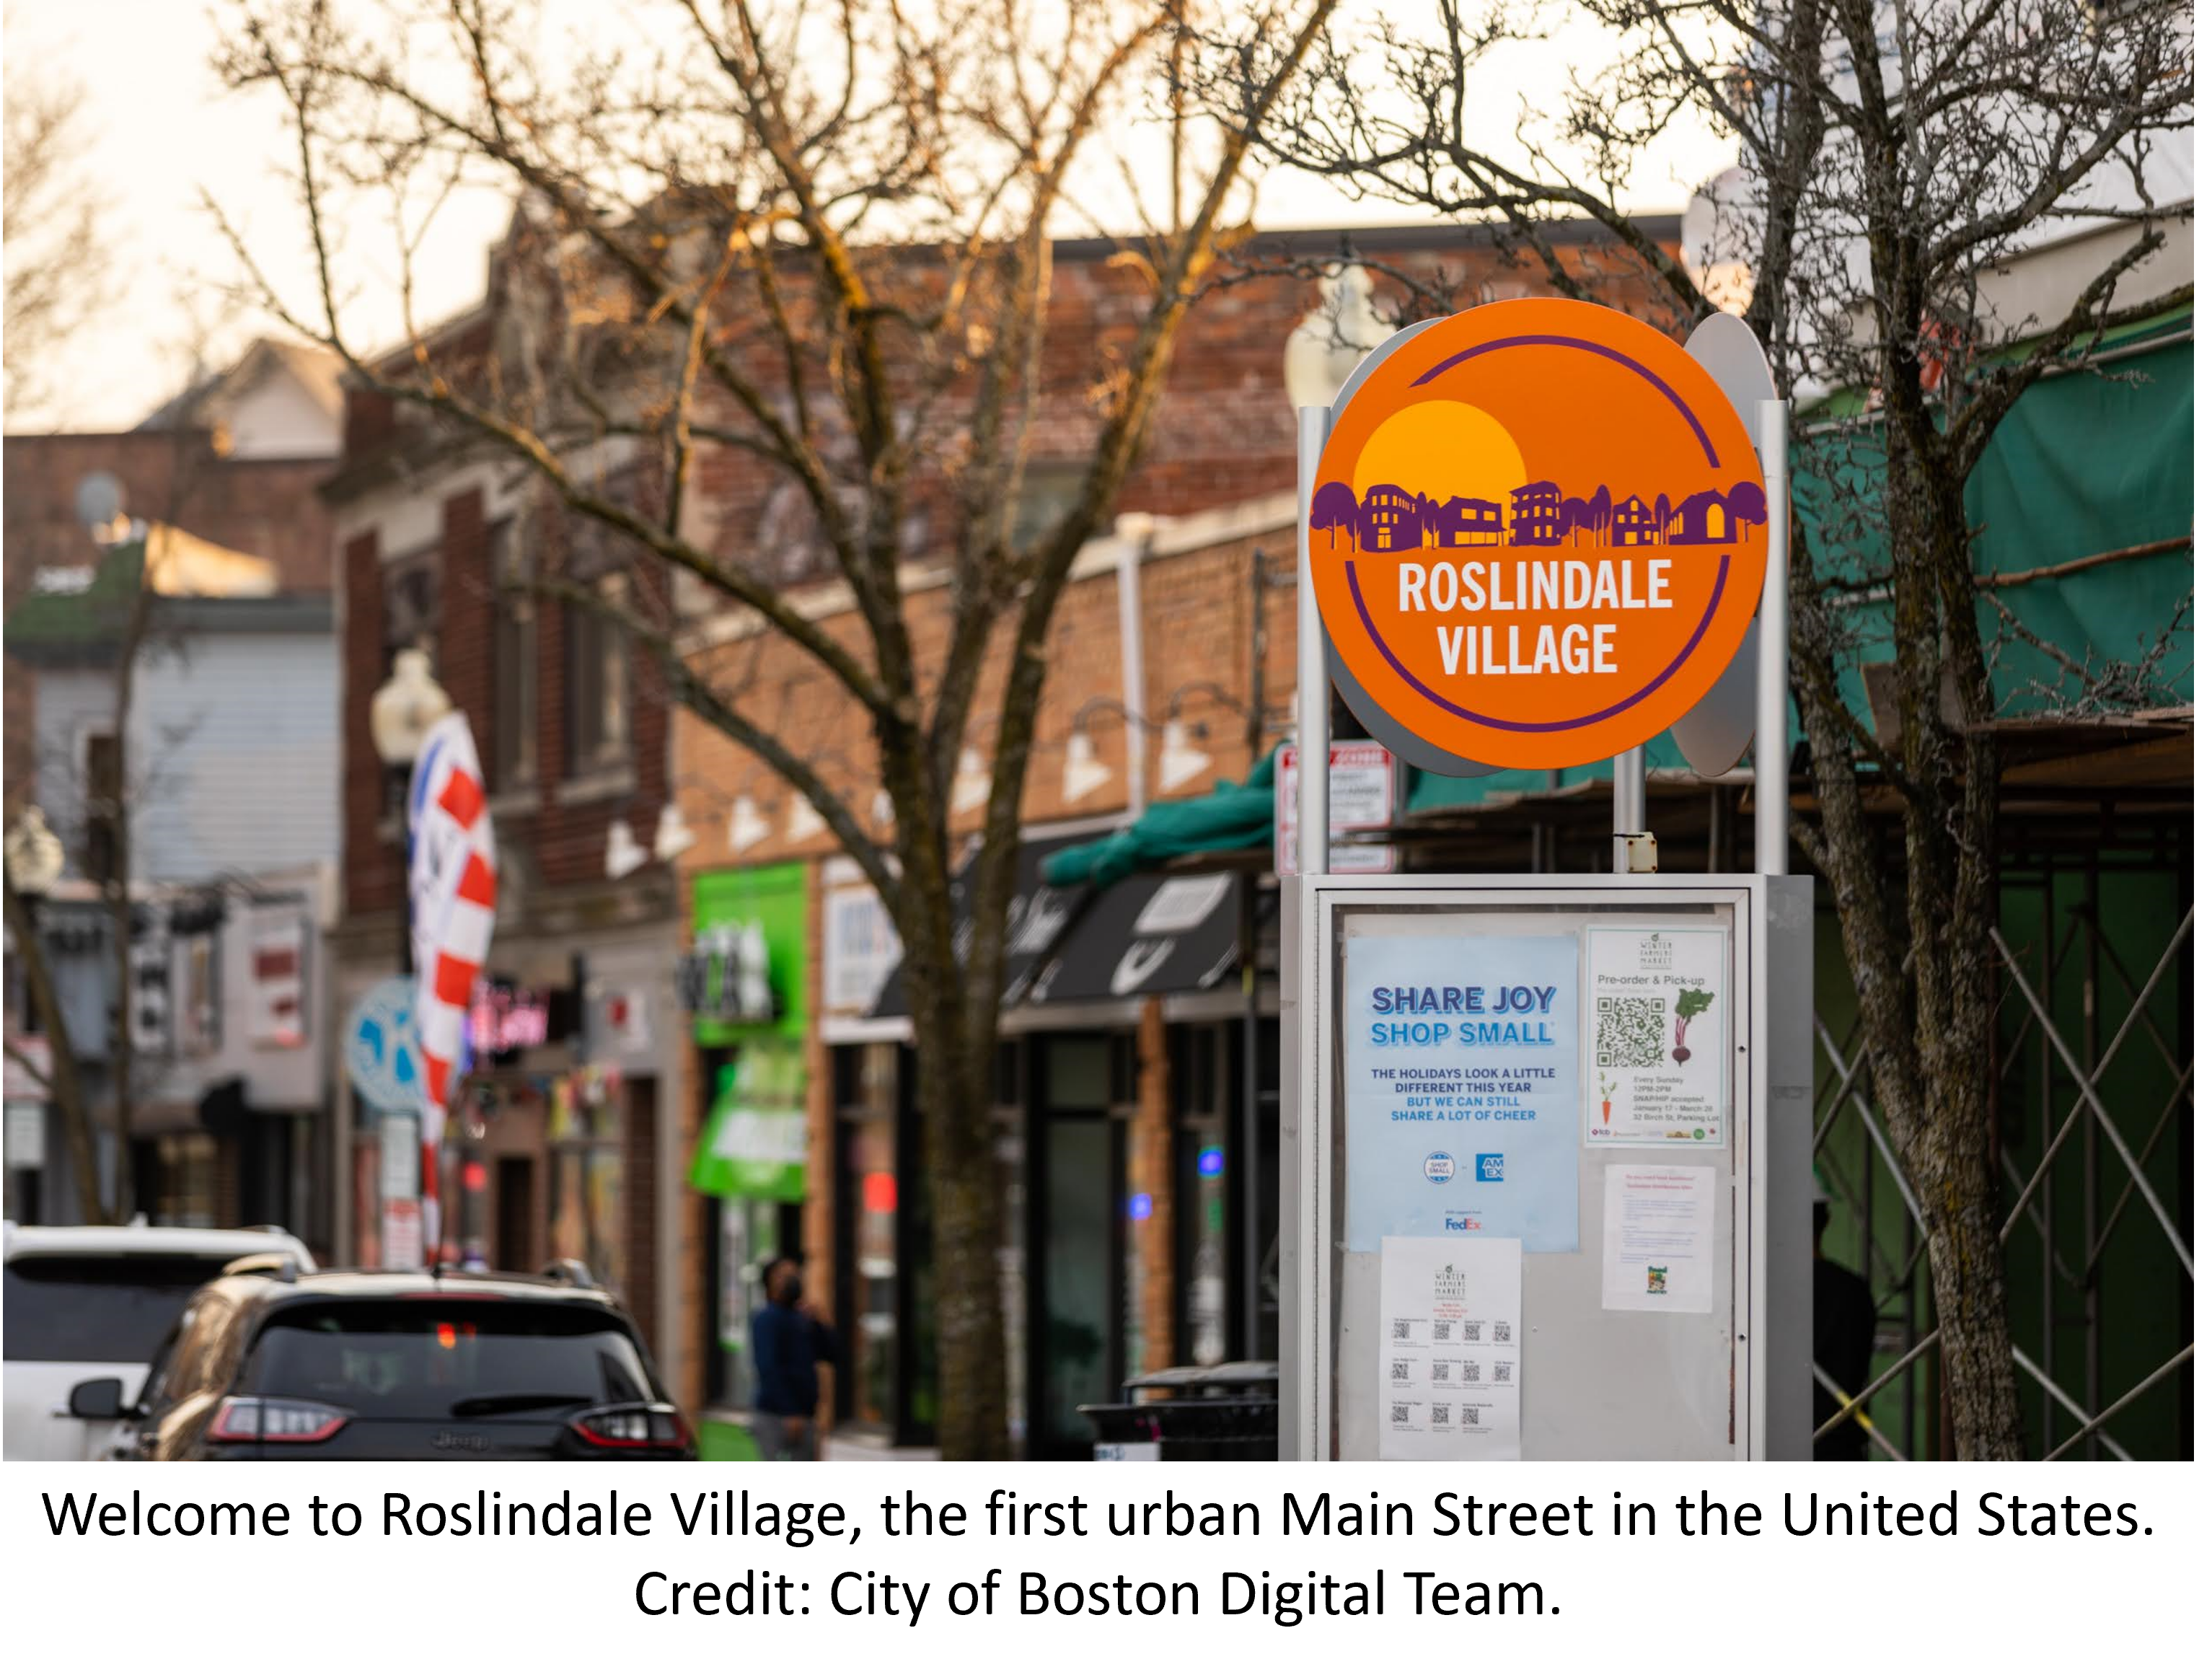 Welcome to Roslindale Village, the first urban Main Street in the United States. Credit: City of Boston Digital Team.